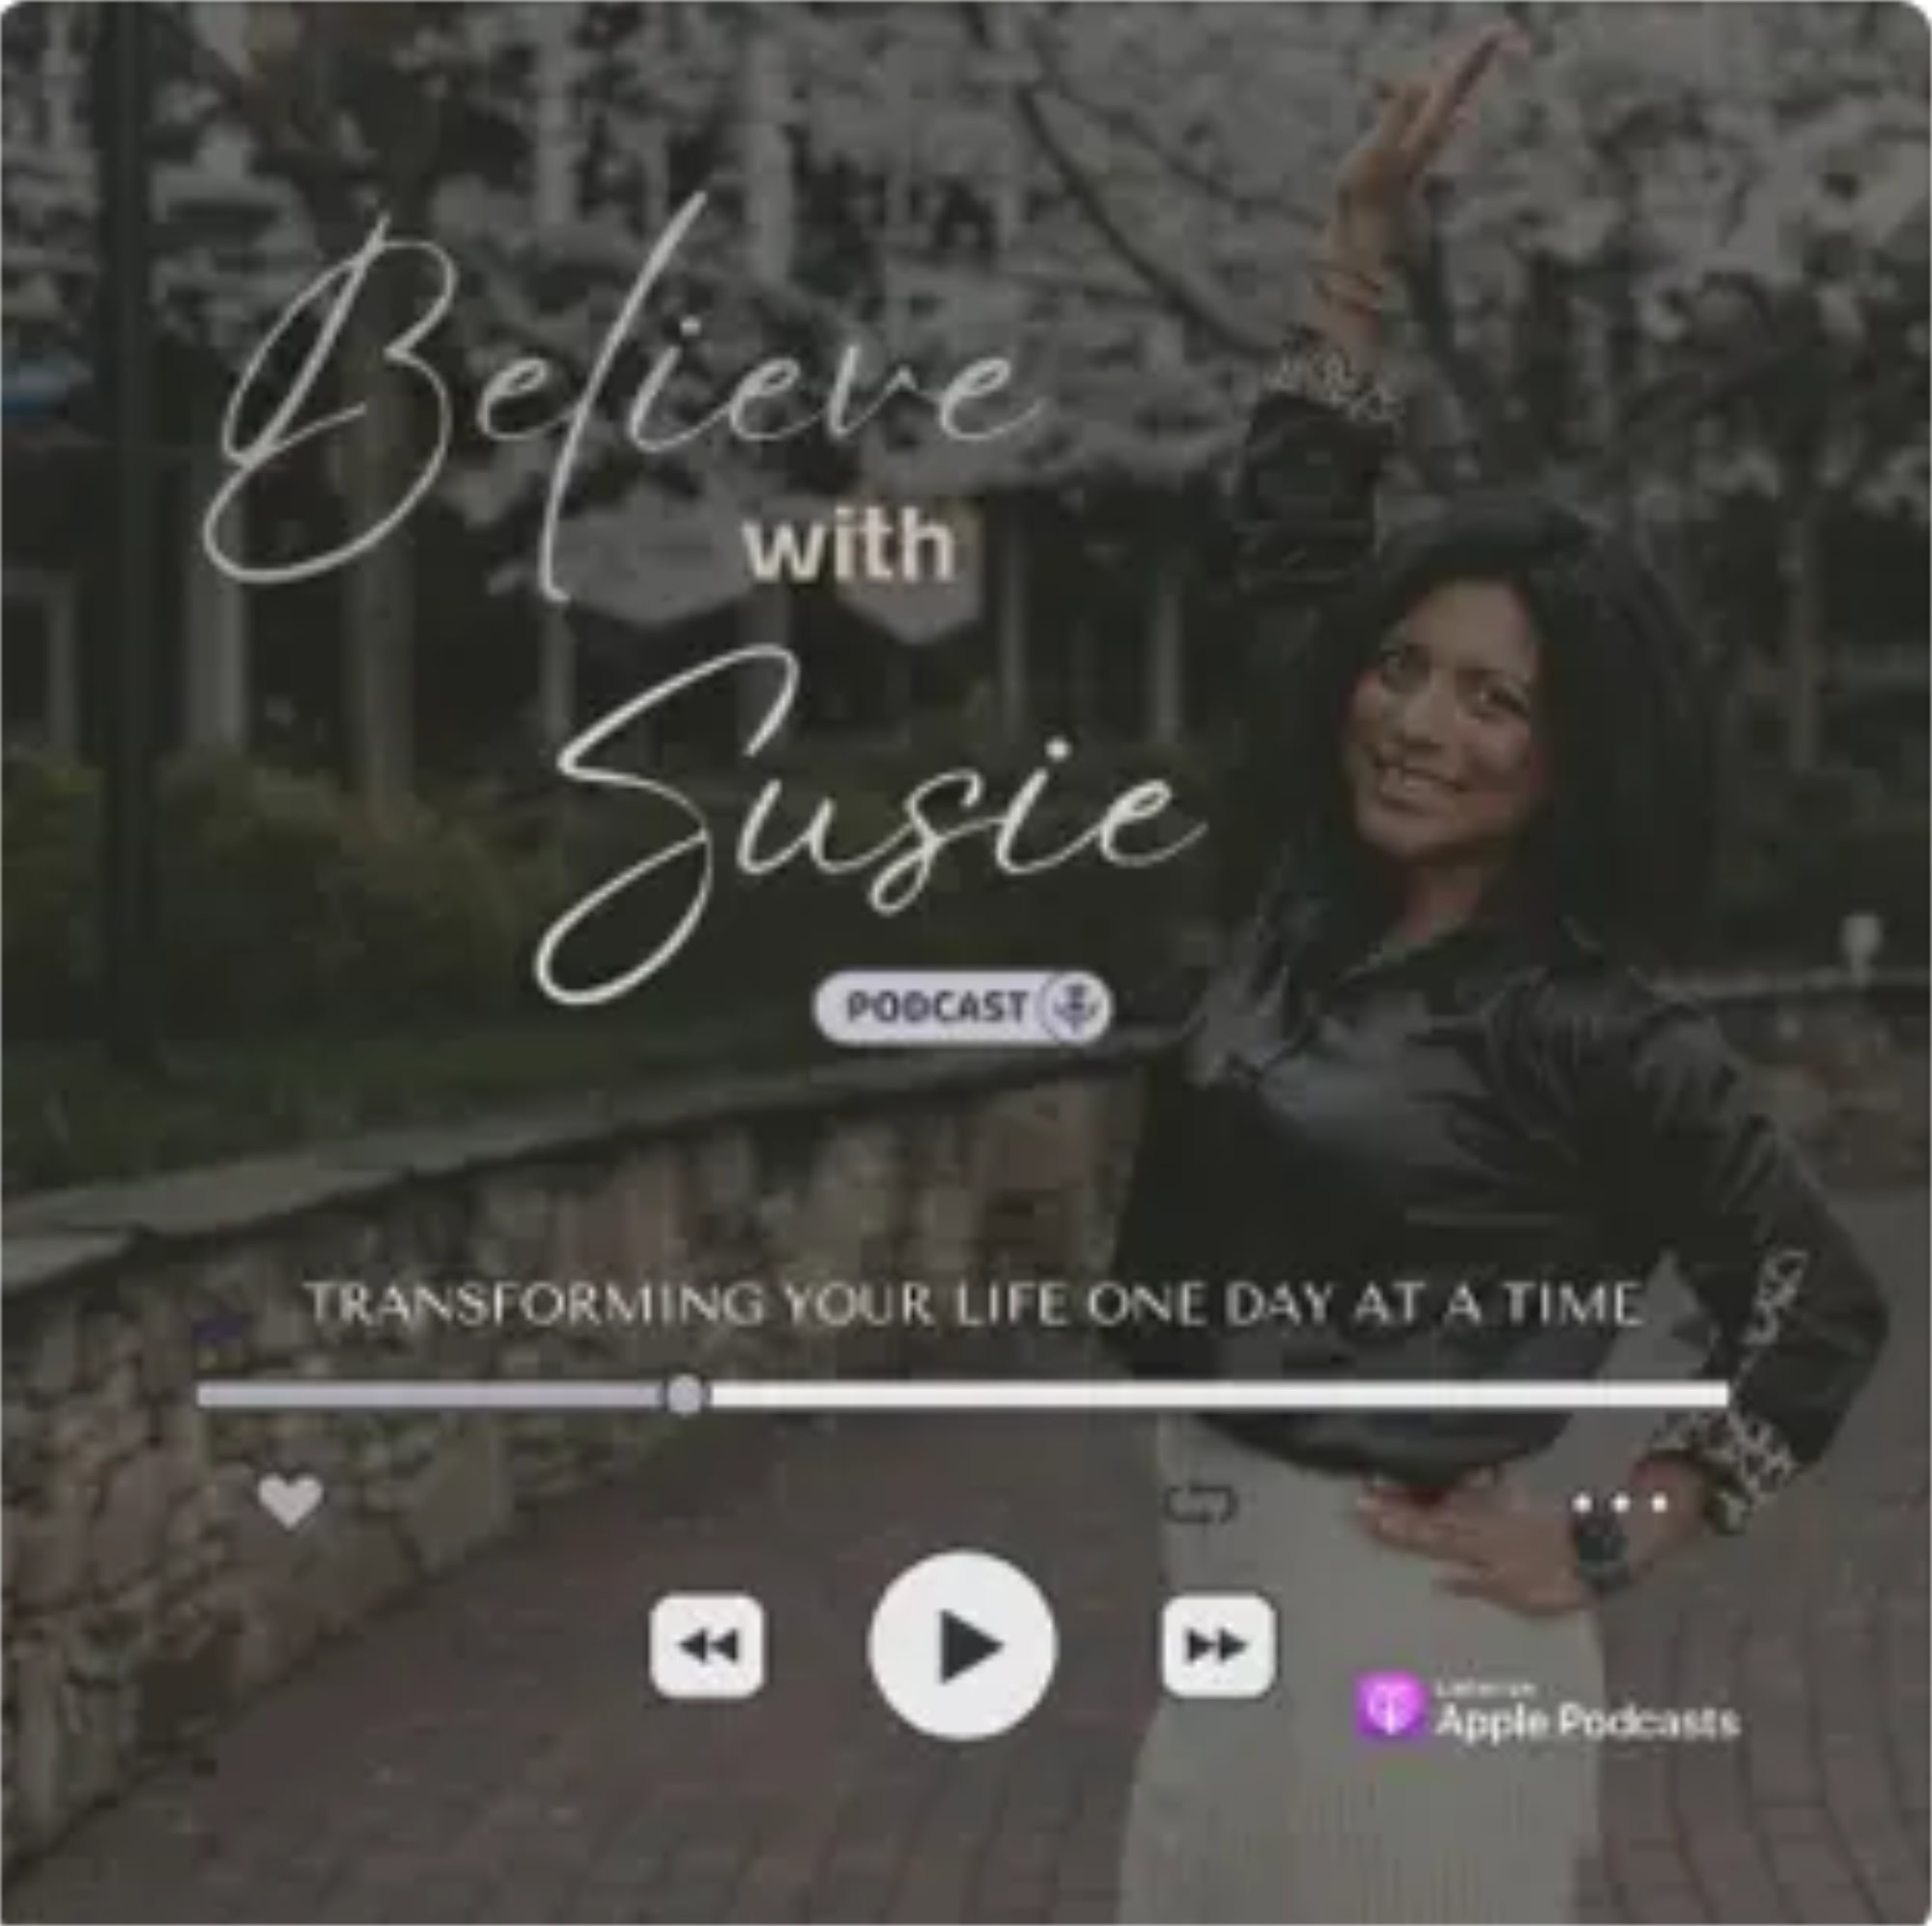 Susie poses with her left hand raised on the cover of the "Believe-With-Susie-Podcast." Text reads "Transforming Your Life One Day at a Time." Play and heart icons are displayed below.